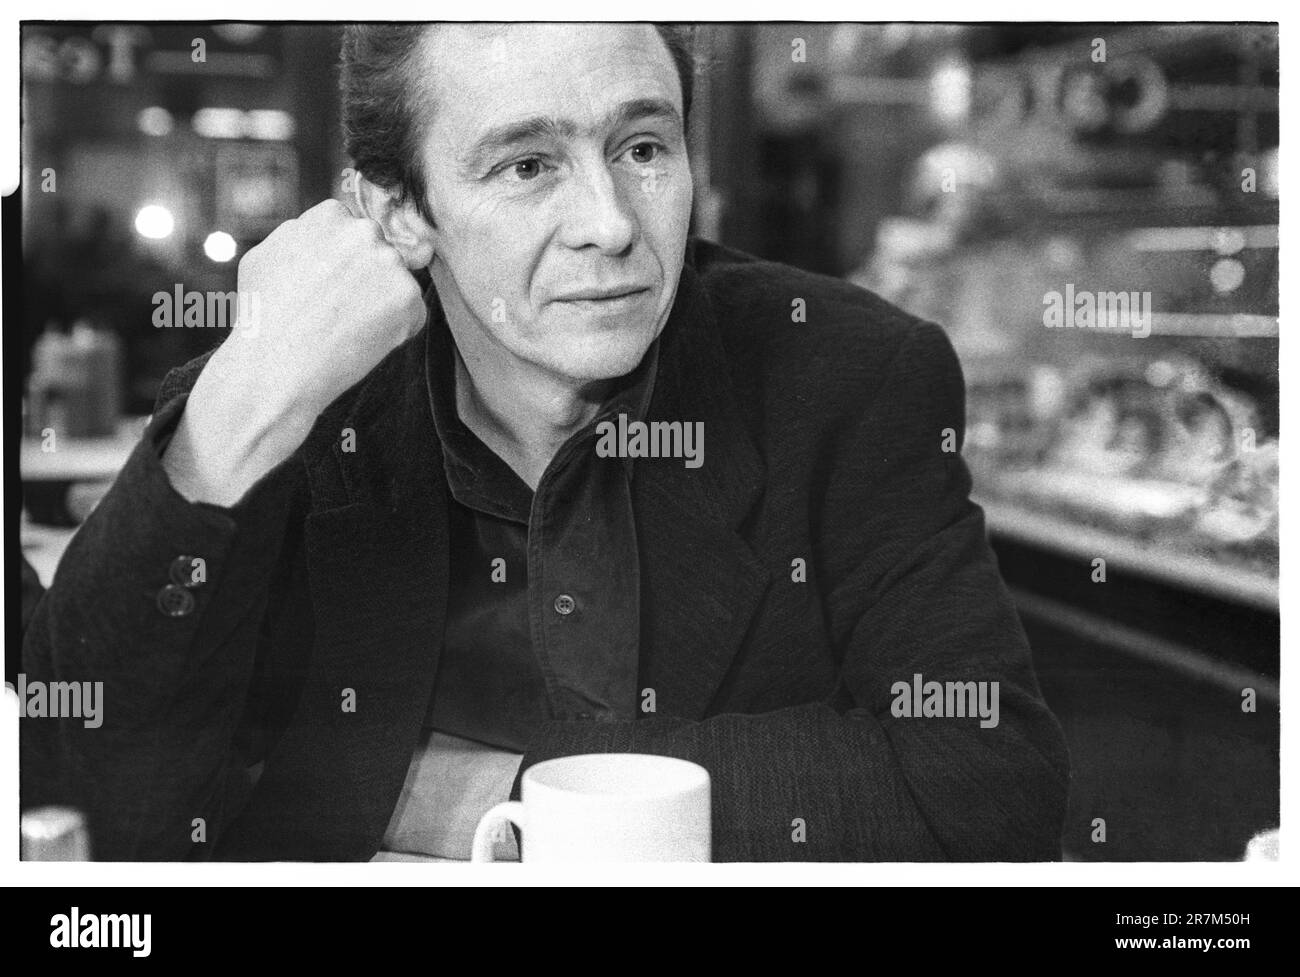 PAUL WHITEHOUSE, COMEDIAN, YOUNG, LONDON, 1996: Interview portrait of comedian and actor Paul Whitehouse at a small cafe in North London, England, UK during Fast Show filming in November 1996. This was a huge breakthrough year for this modern British comedy legend. Photo: Rob Watkins Stock Photo